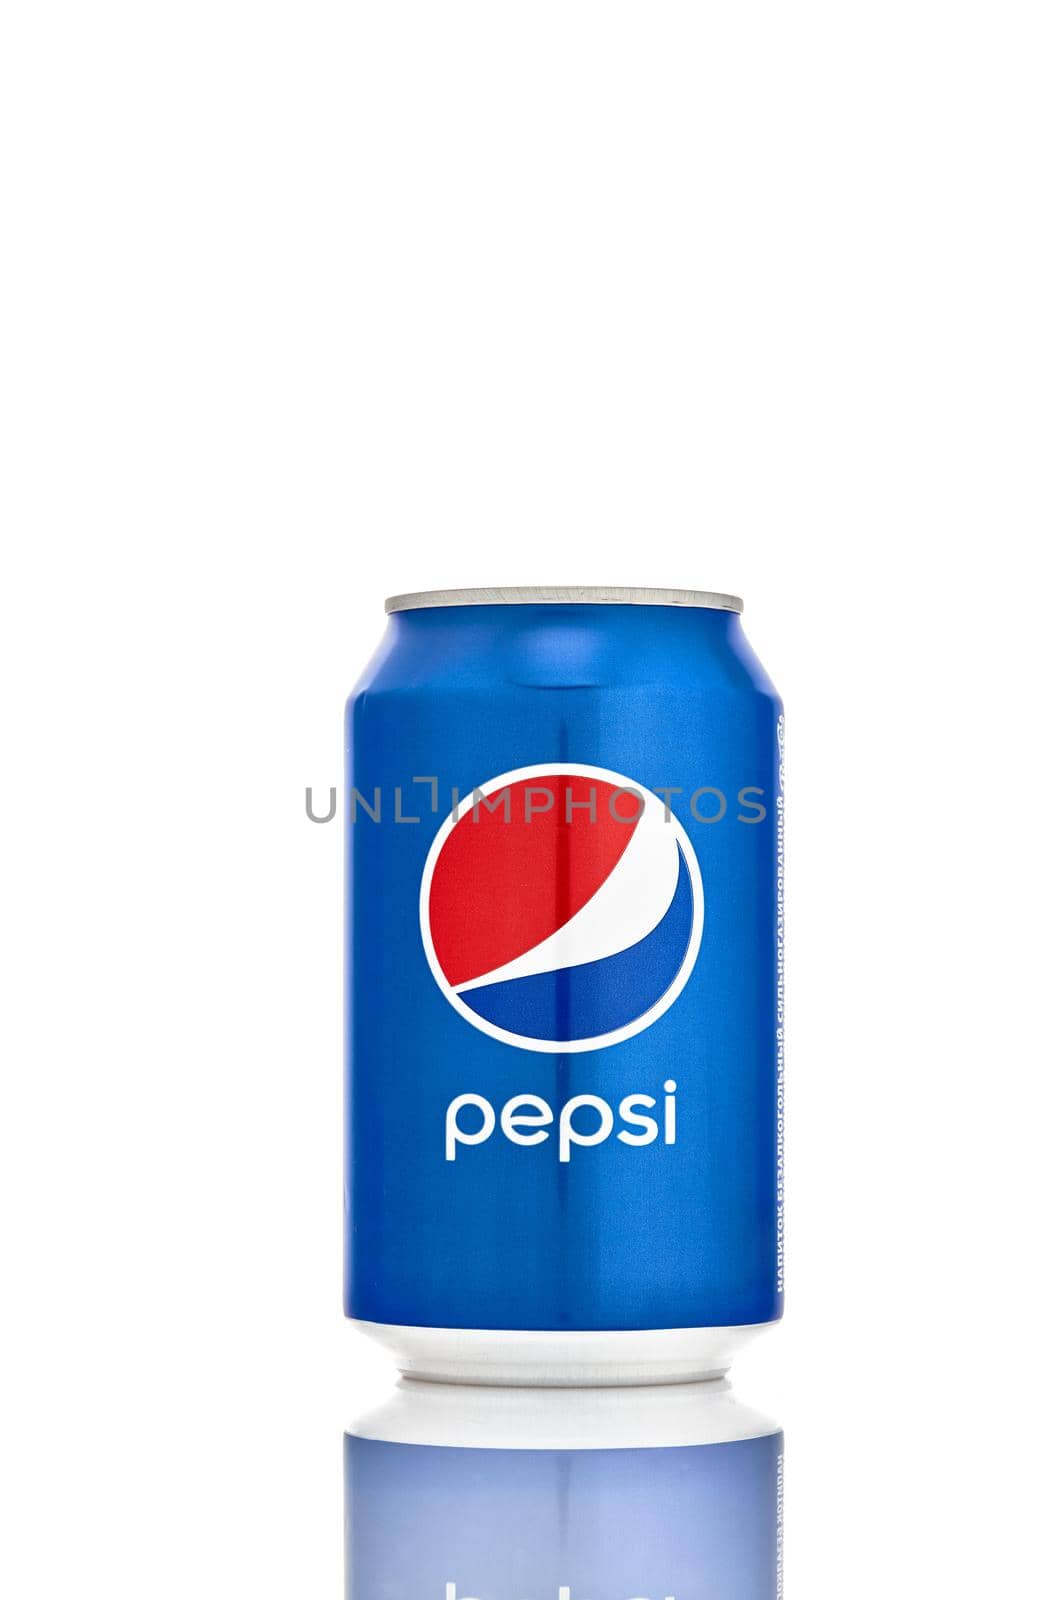 Can of Pepsi, isolate on white background with reflection. Popular soft drink. 21.06.2019, Rostov-on-Don, Russia. by EvgeniyQW